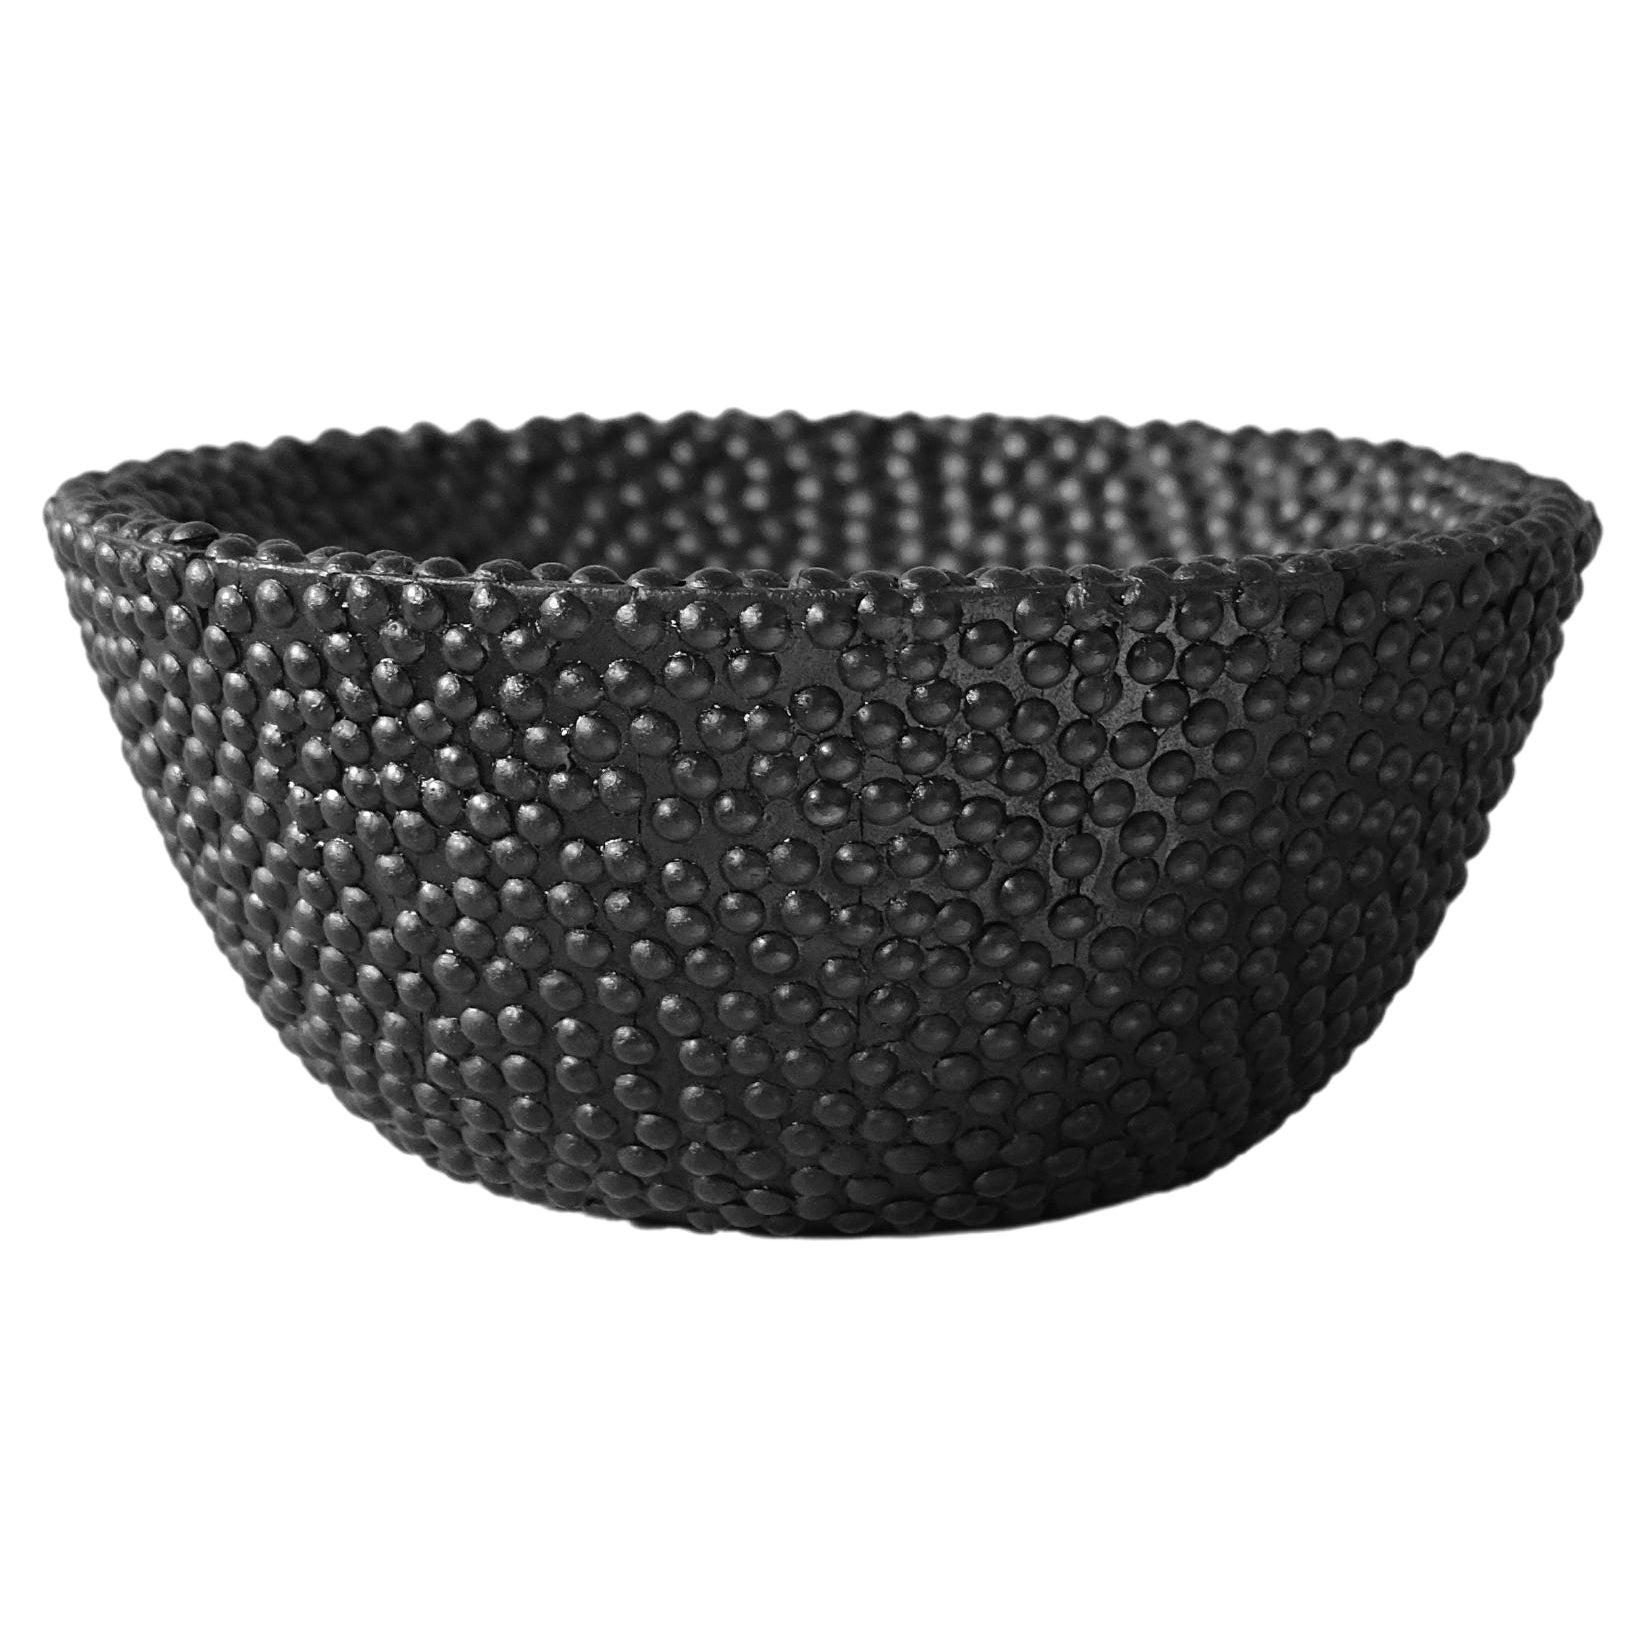 Nailed Bowl, Arno Declercq For Sale